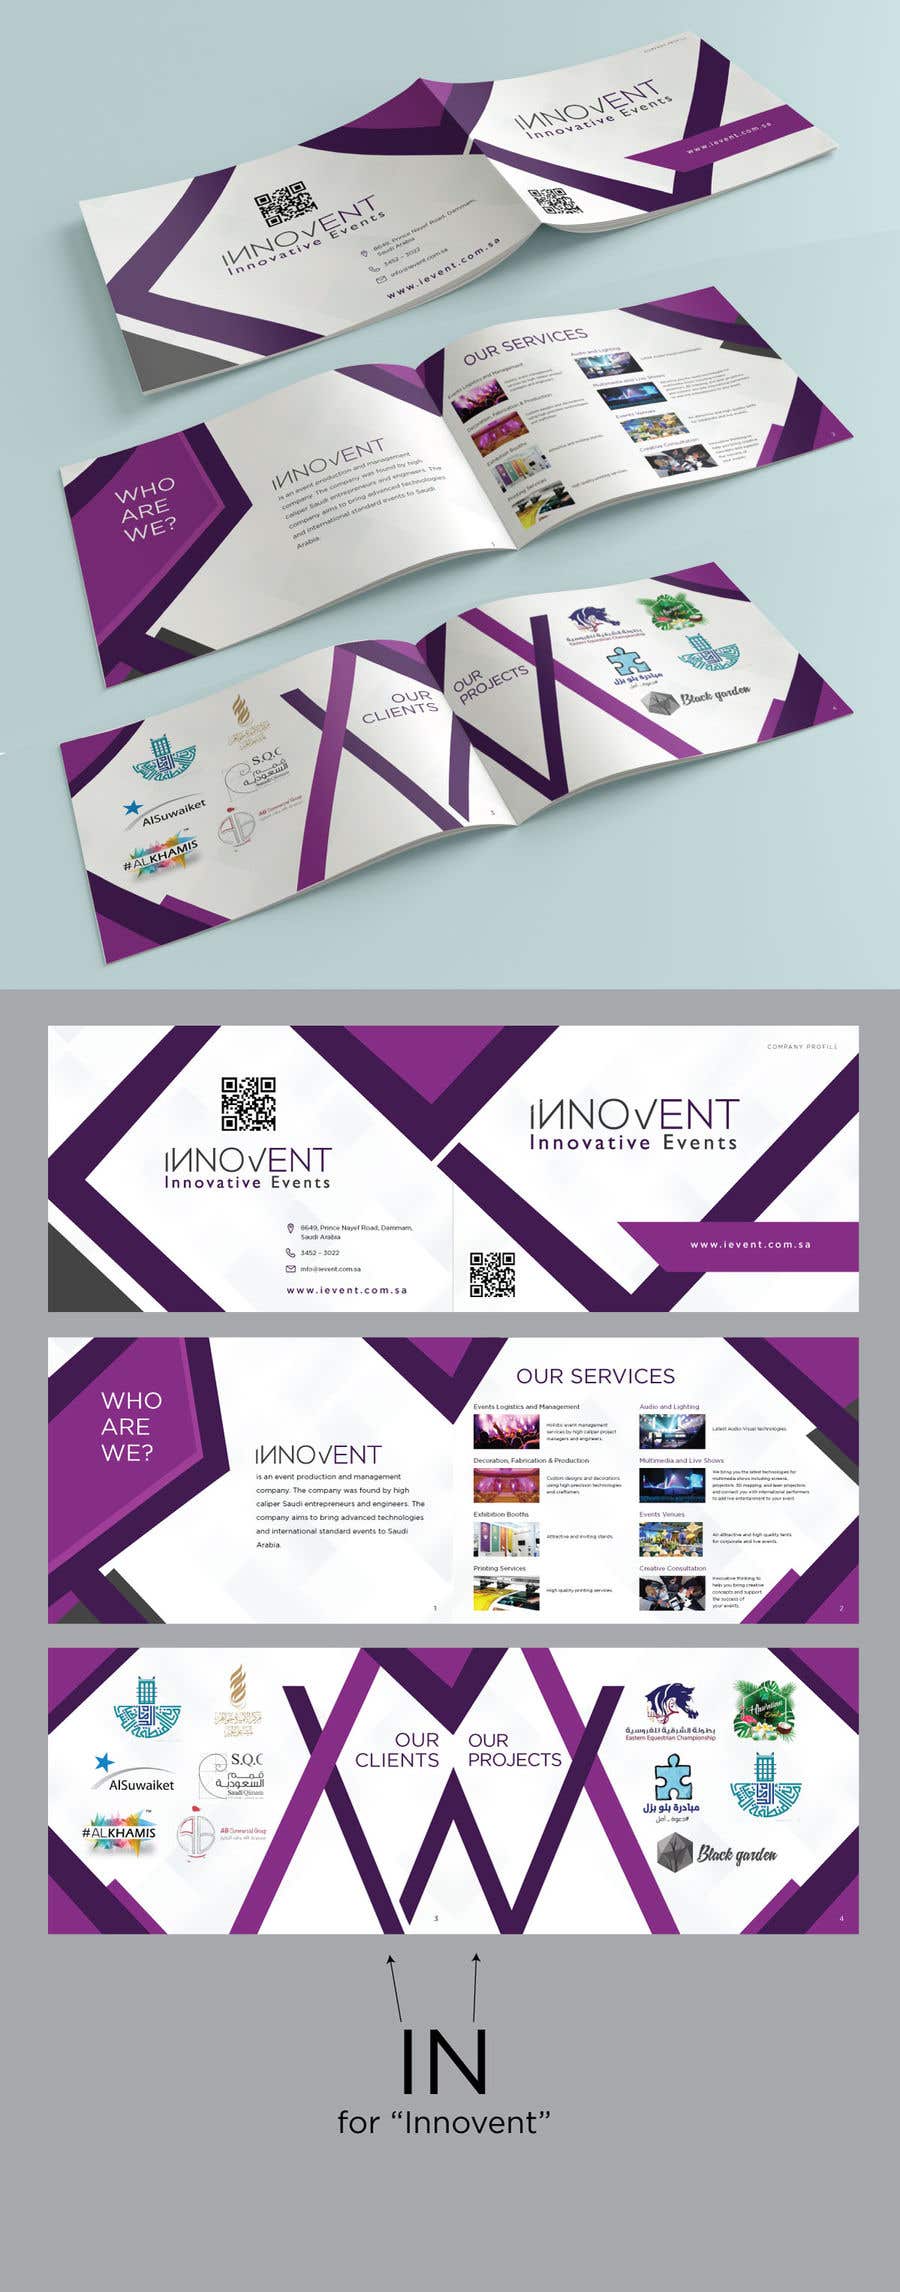 Contest Entry #28 for                                                 Design a Brochure
                                            